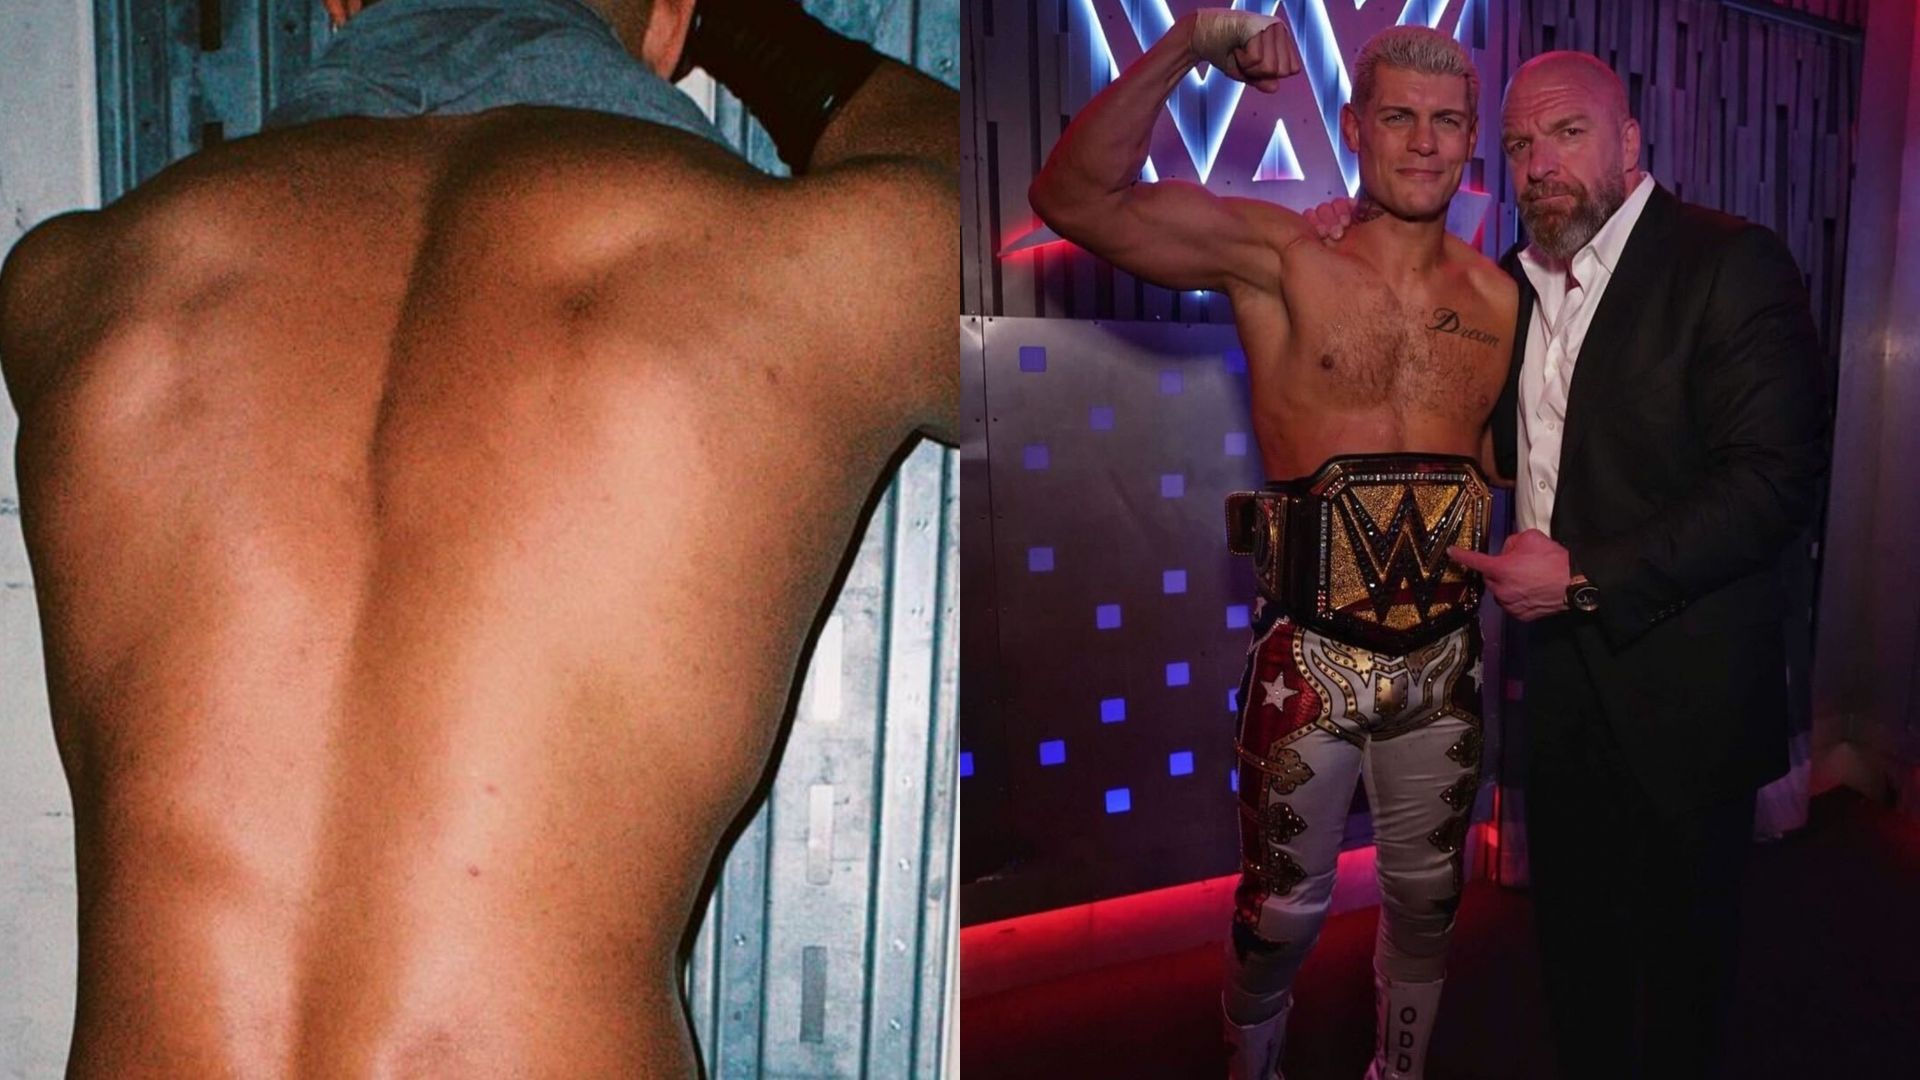 Will Cody Rhodes convince WWE CCO Triple H to sign a top AEW star?